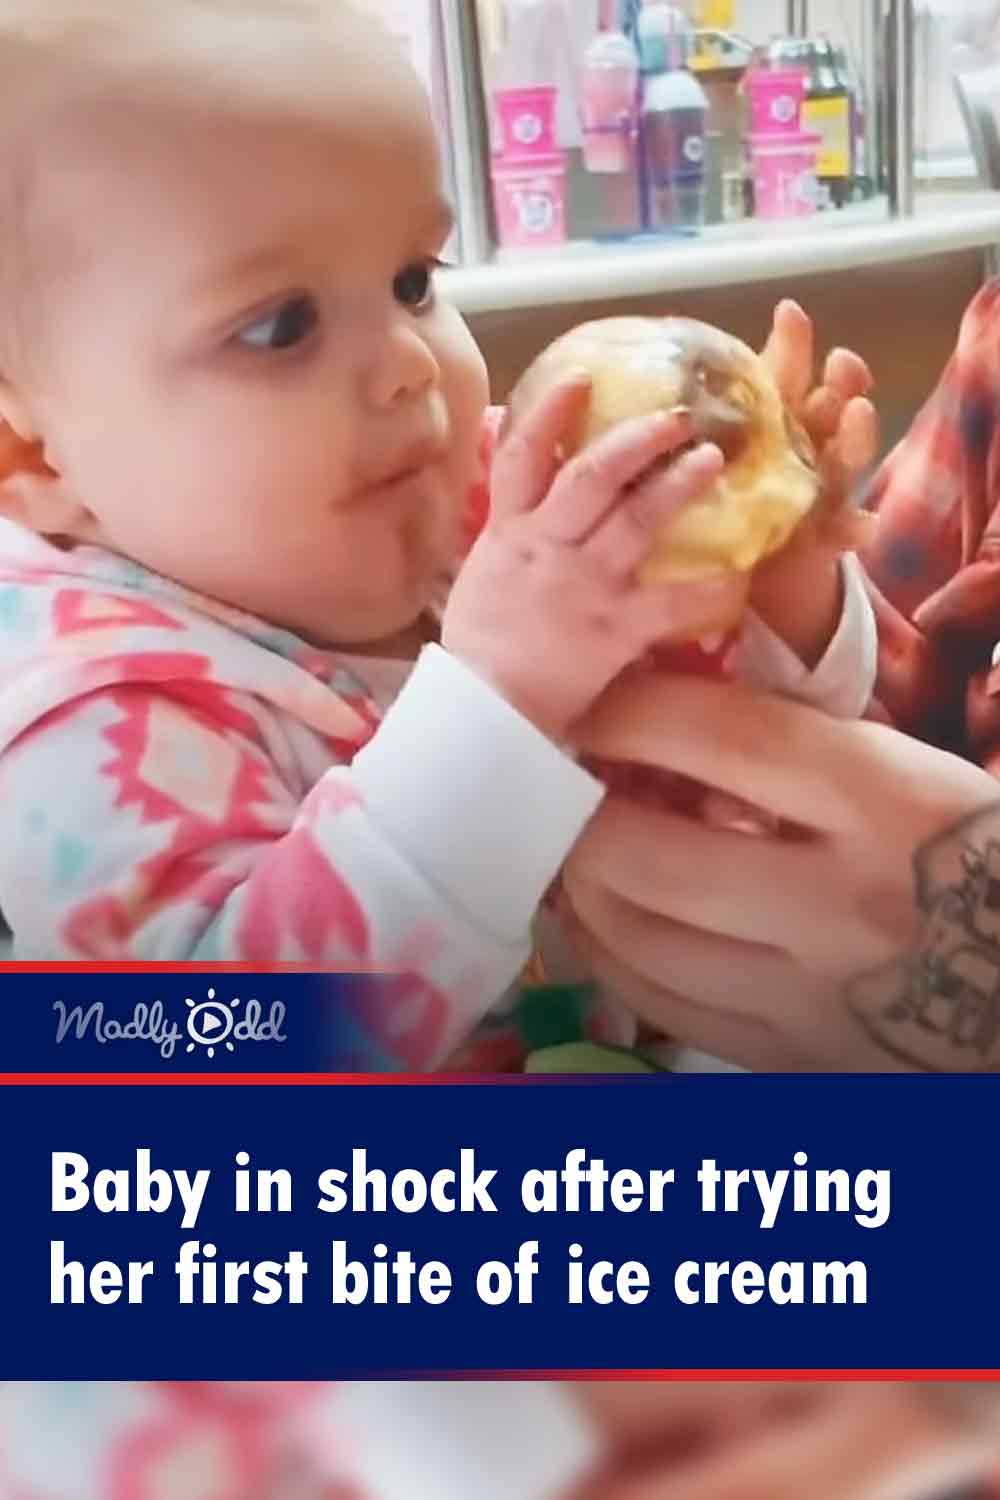 Baby in shock after trying her first bite of ice cream